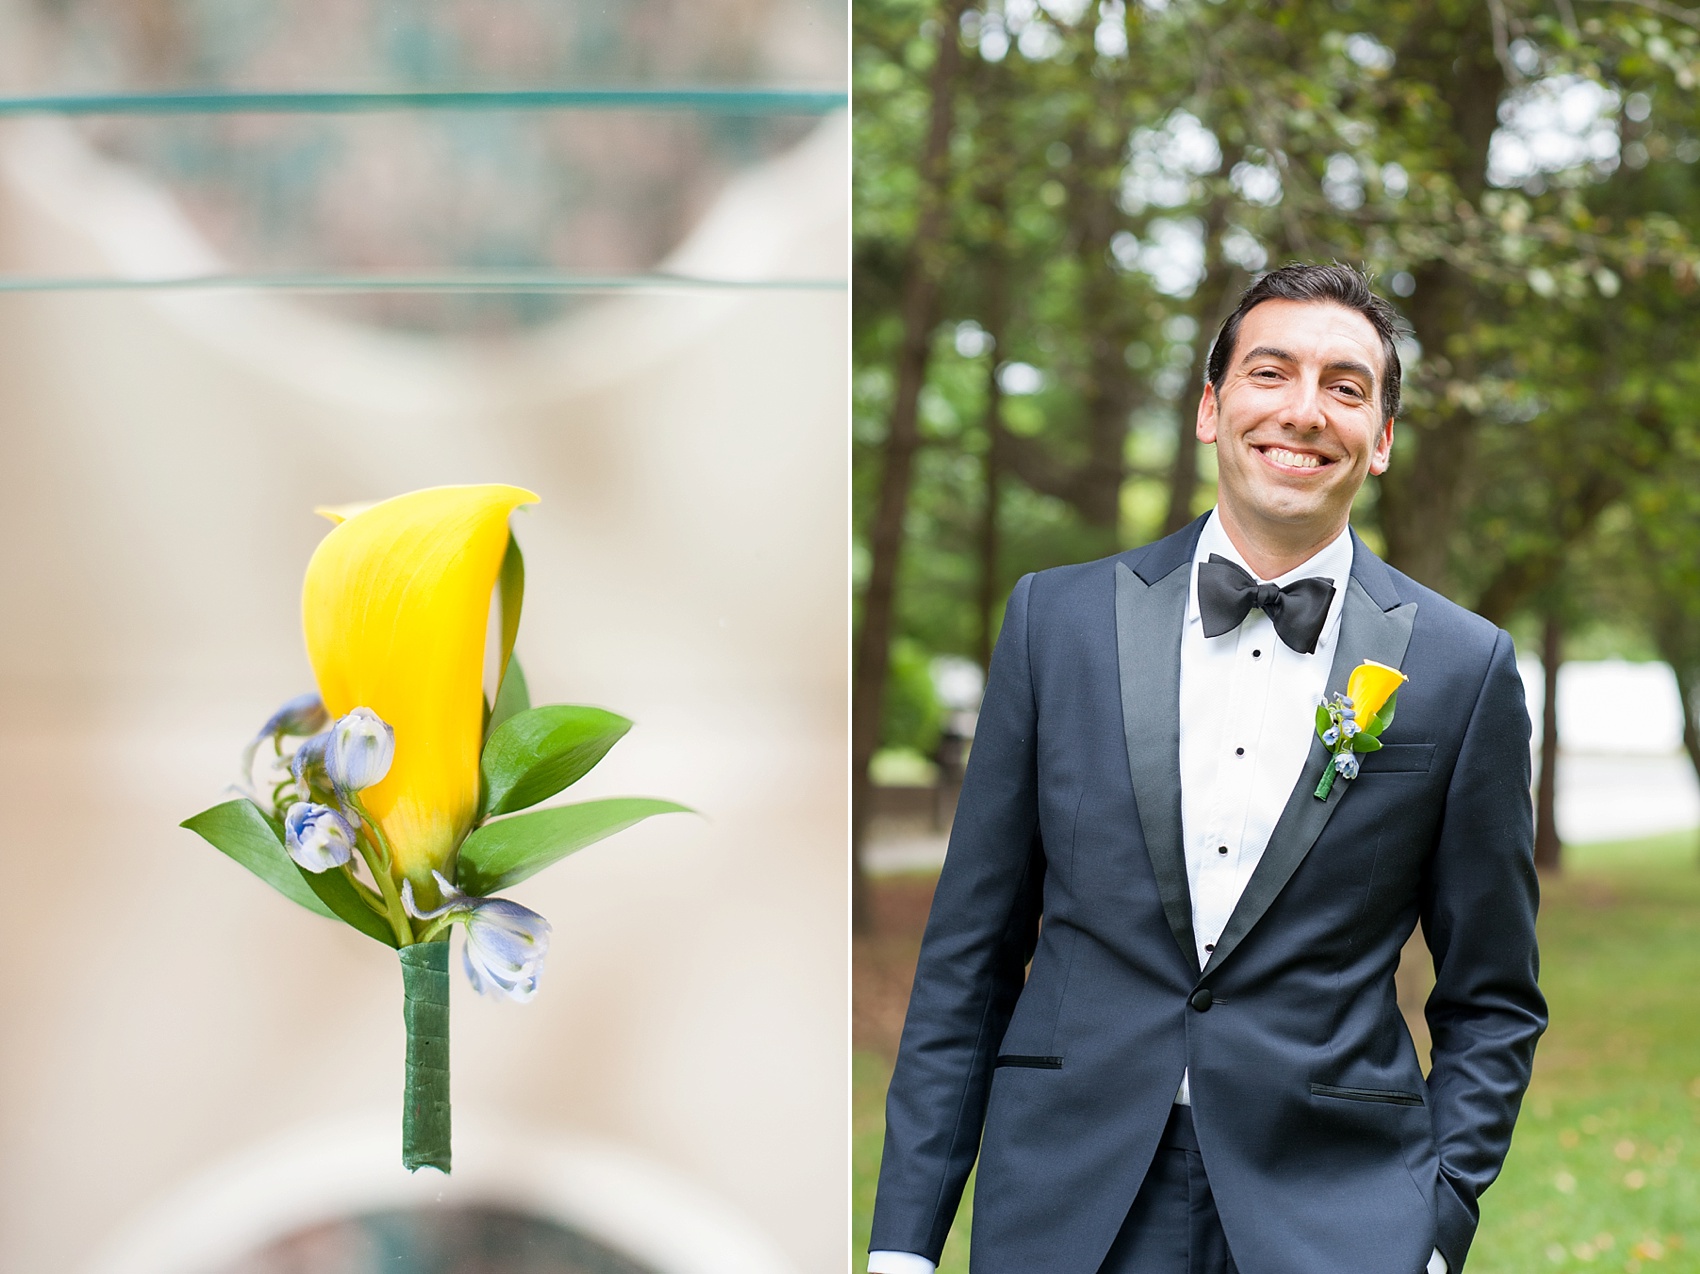 Perona Farms wedding photos of navy blue tuxedo groom and yellow calla lily boutonniere for their colorful summer celebration. Pictures by New Jersey photographer Mikkel Paige Photography.